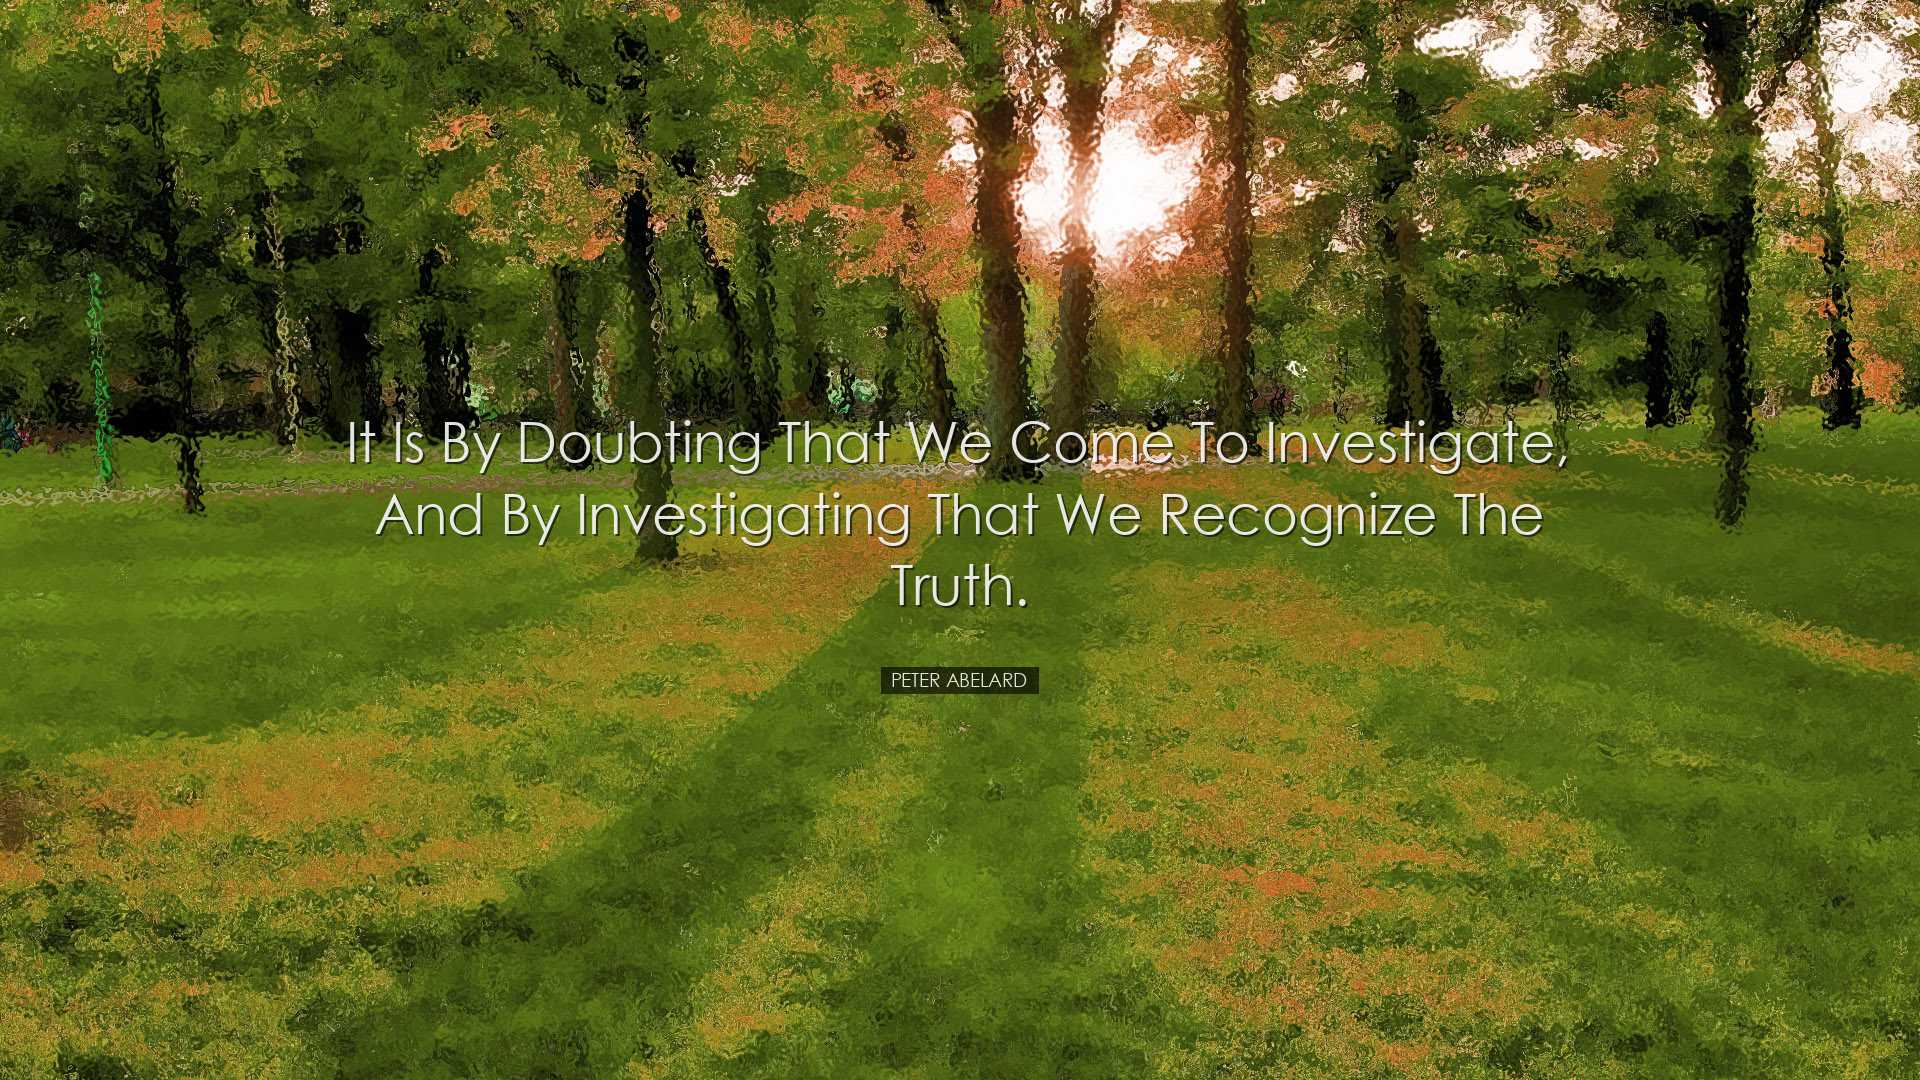 It is by doubting that we come to investigate, and by investigatin